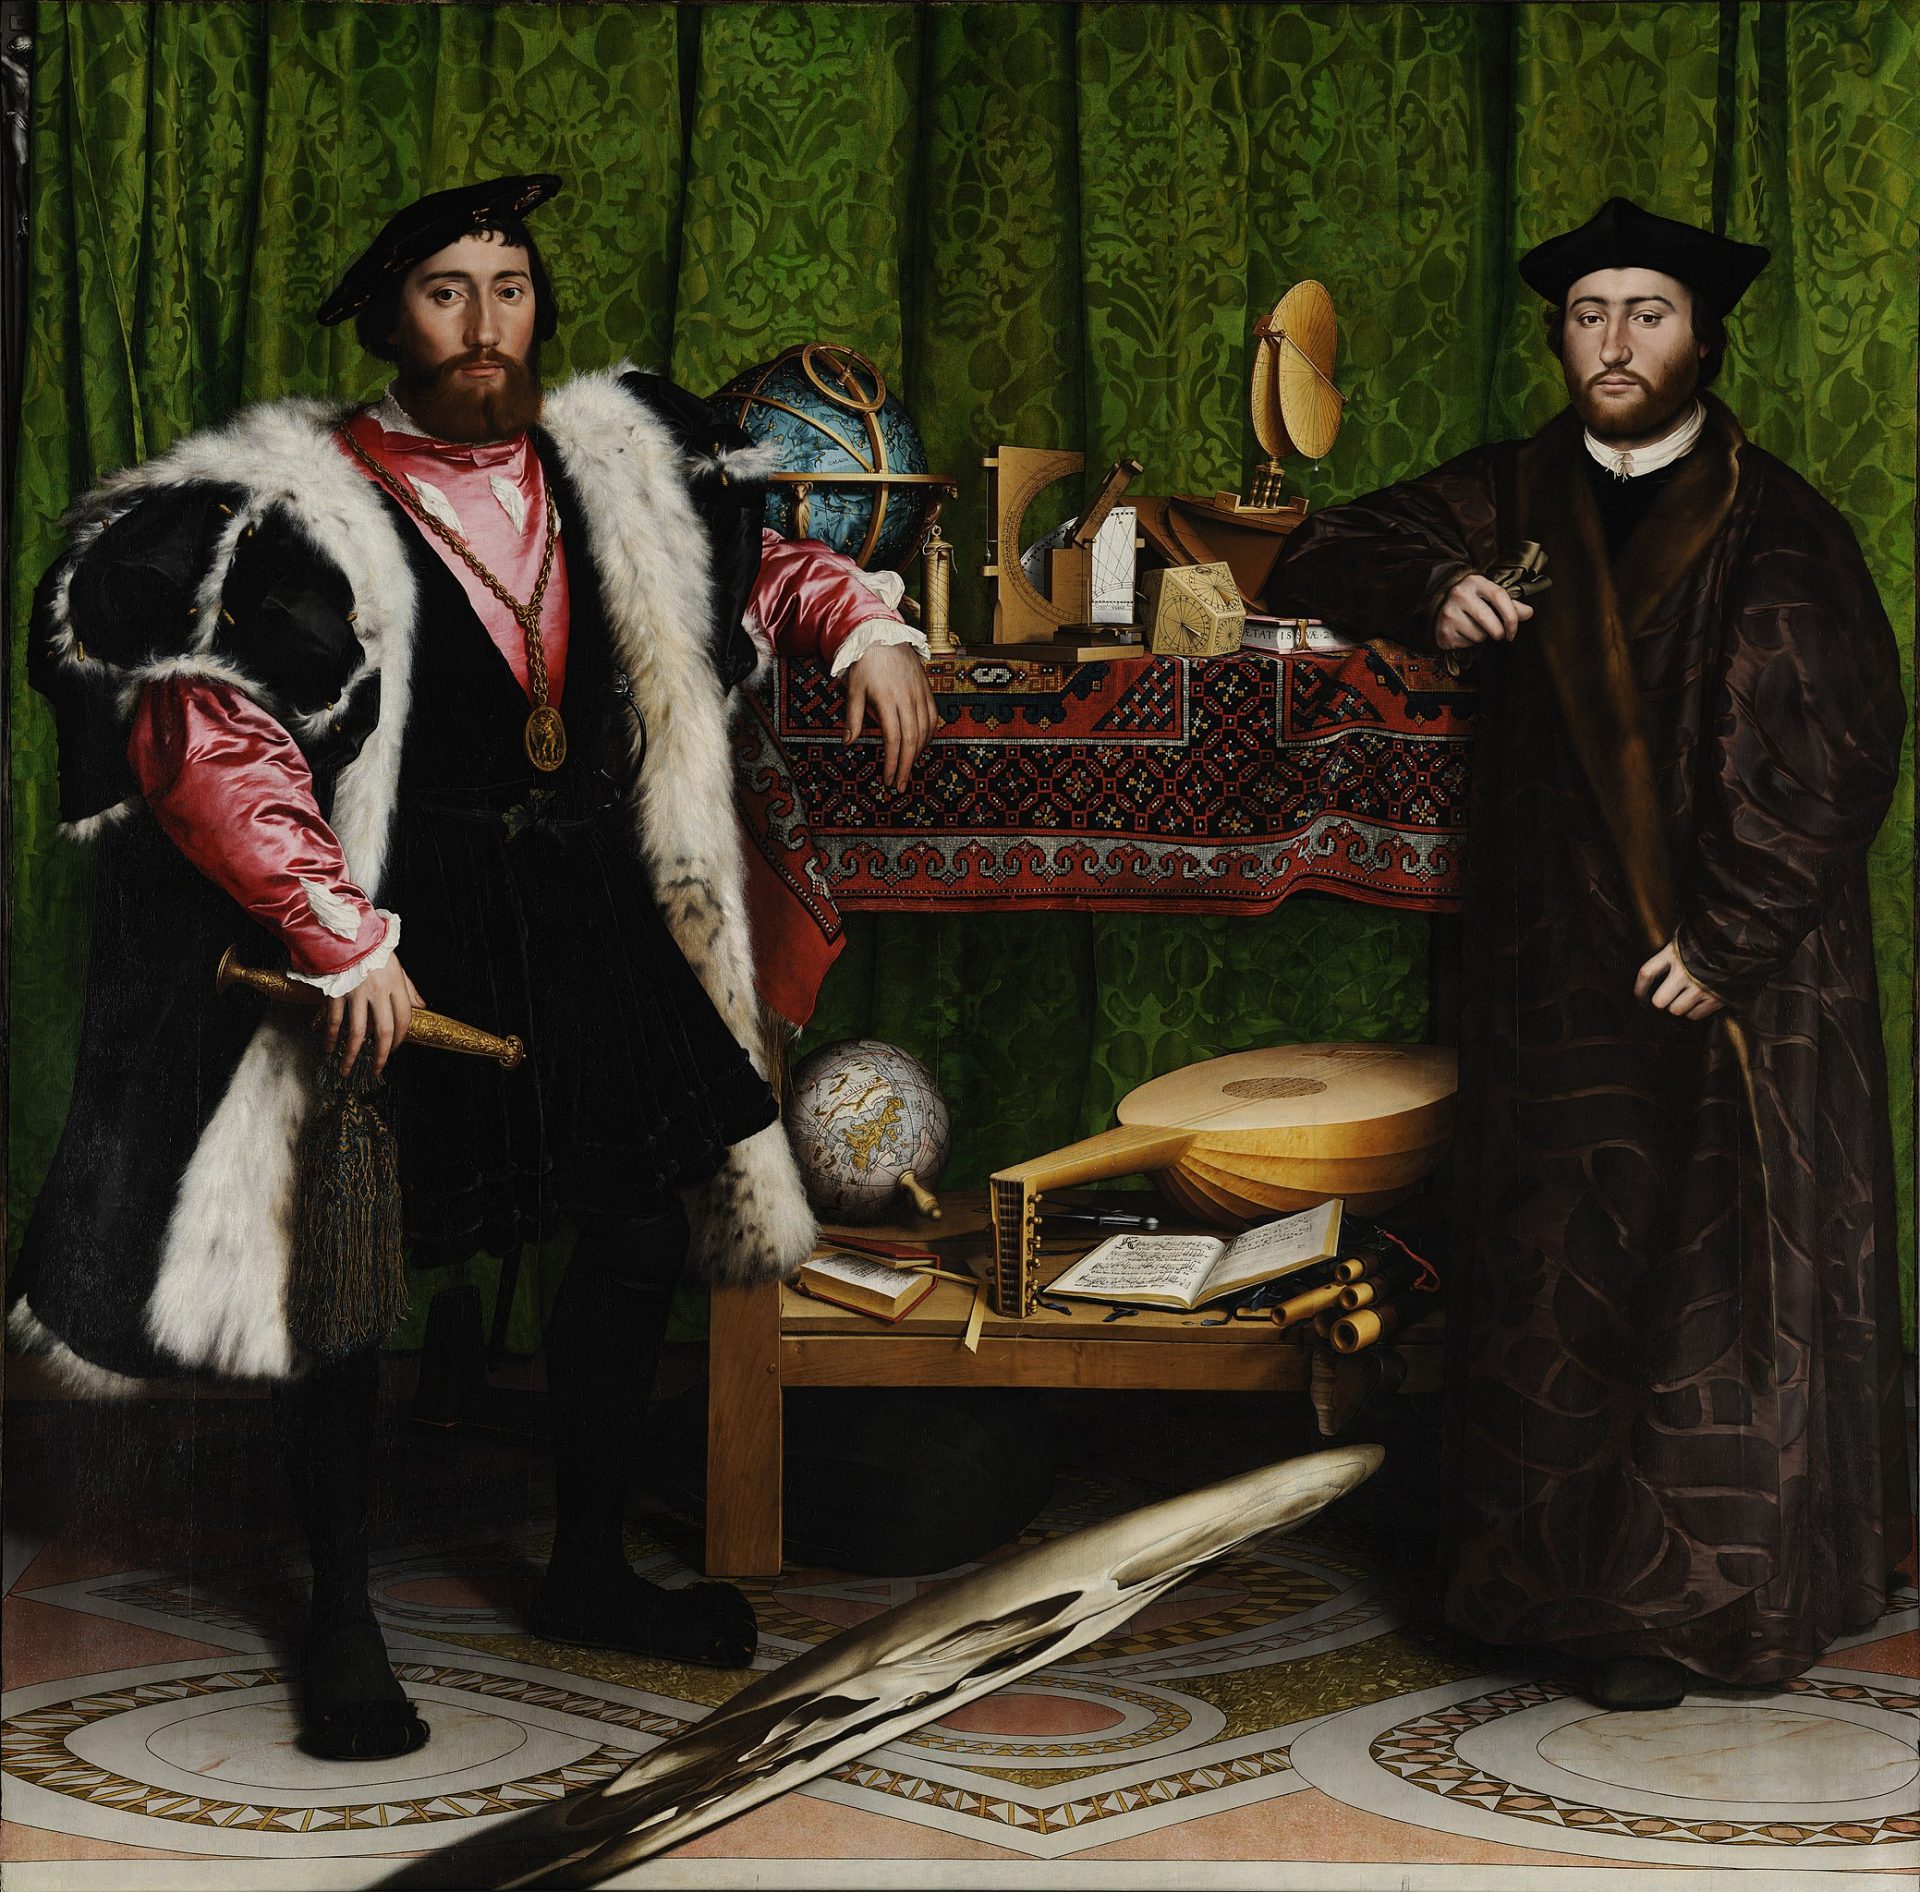 A painting with memento mori elements, depicting two prominent ambassadors from the renaissance period.